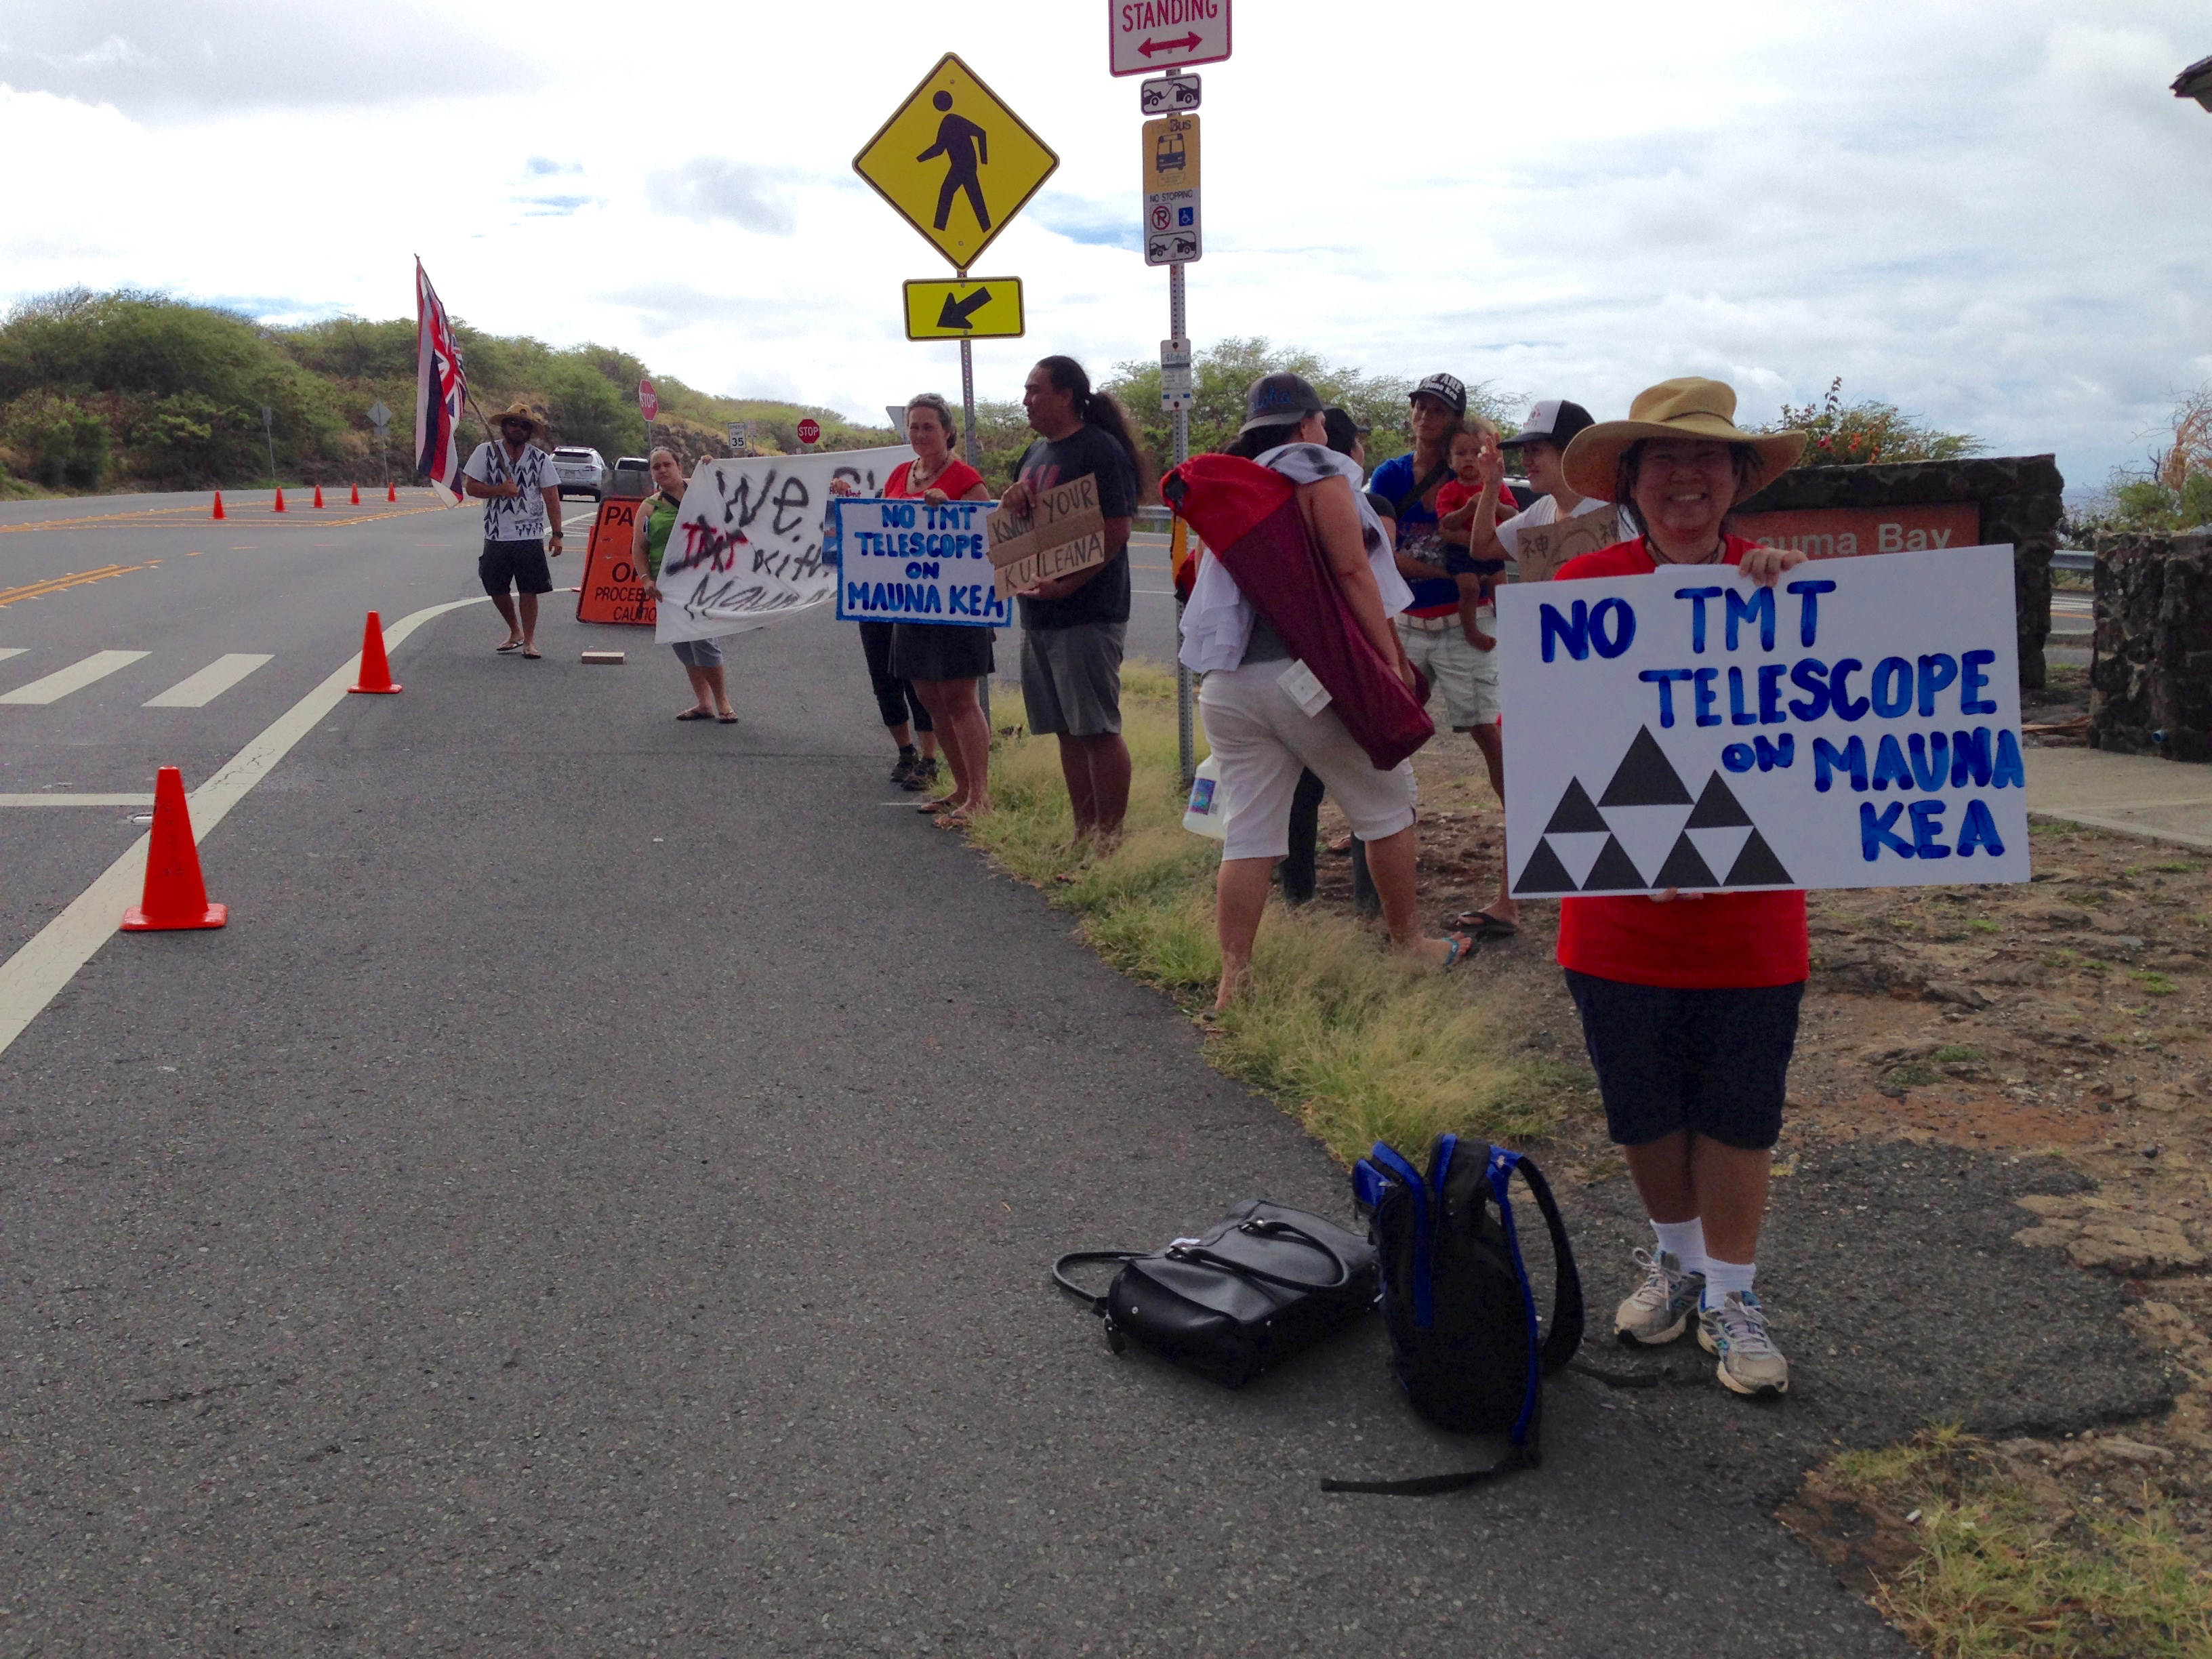 People stand and hold signs on the side of the road. One person in a red shirt holds a sign that reads “NO TMT TELESCOPE ON MAUNA KEA.” The sign is illustrated with triangle-shaped mountains.